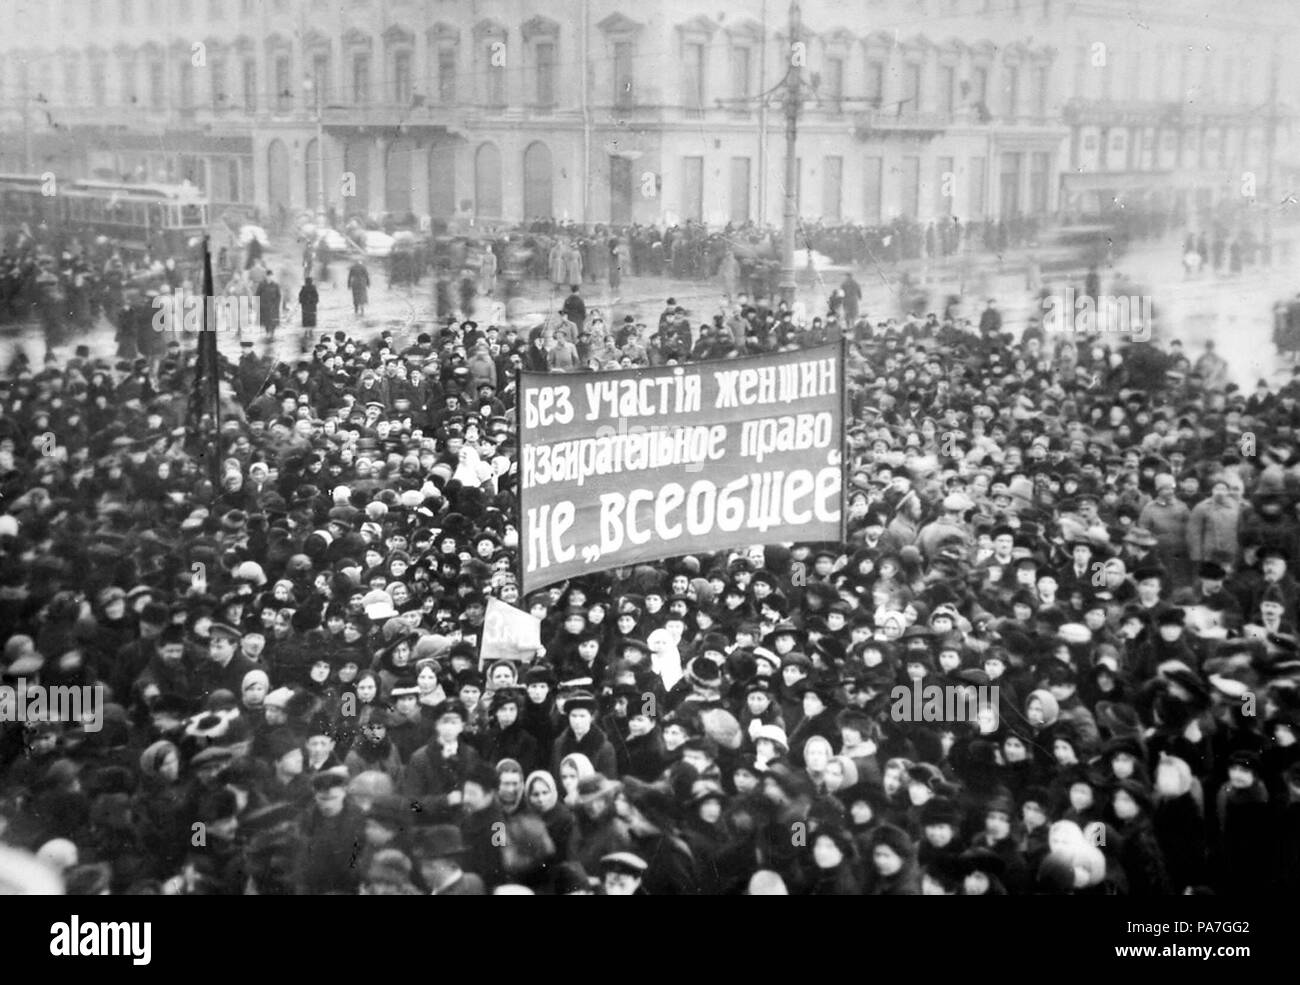 Women's Suffrage Demonstration on the Nevsky Prospect in Petrograd on March 8, 1917. Museum: Russian State Film and Photo Archive, Krasnogorsk. Stock Photo